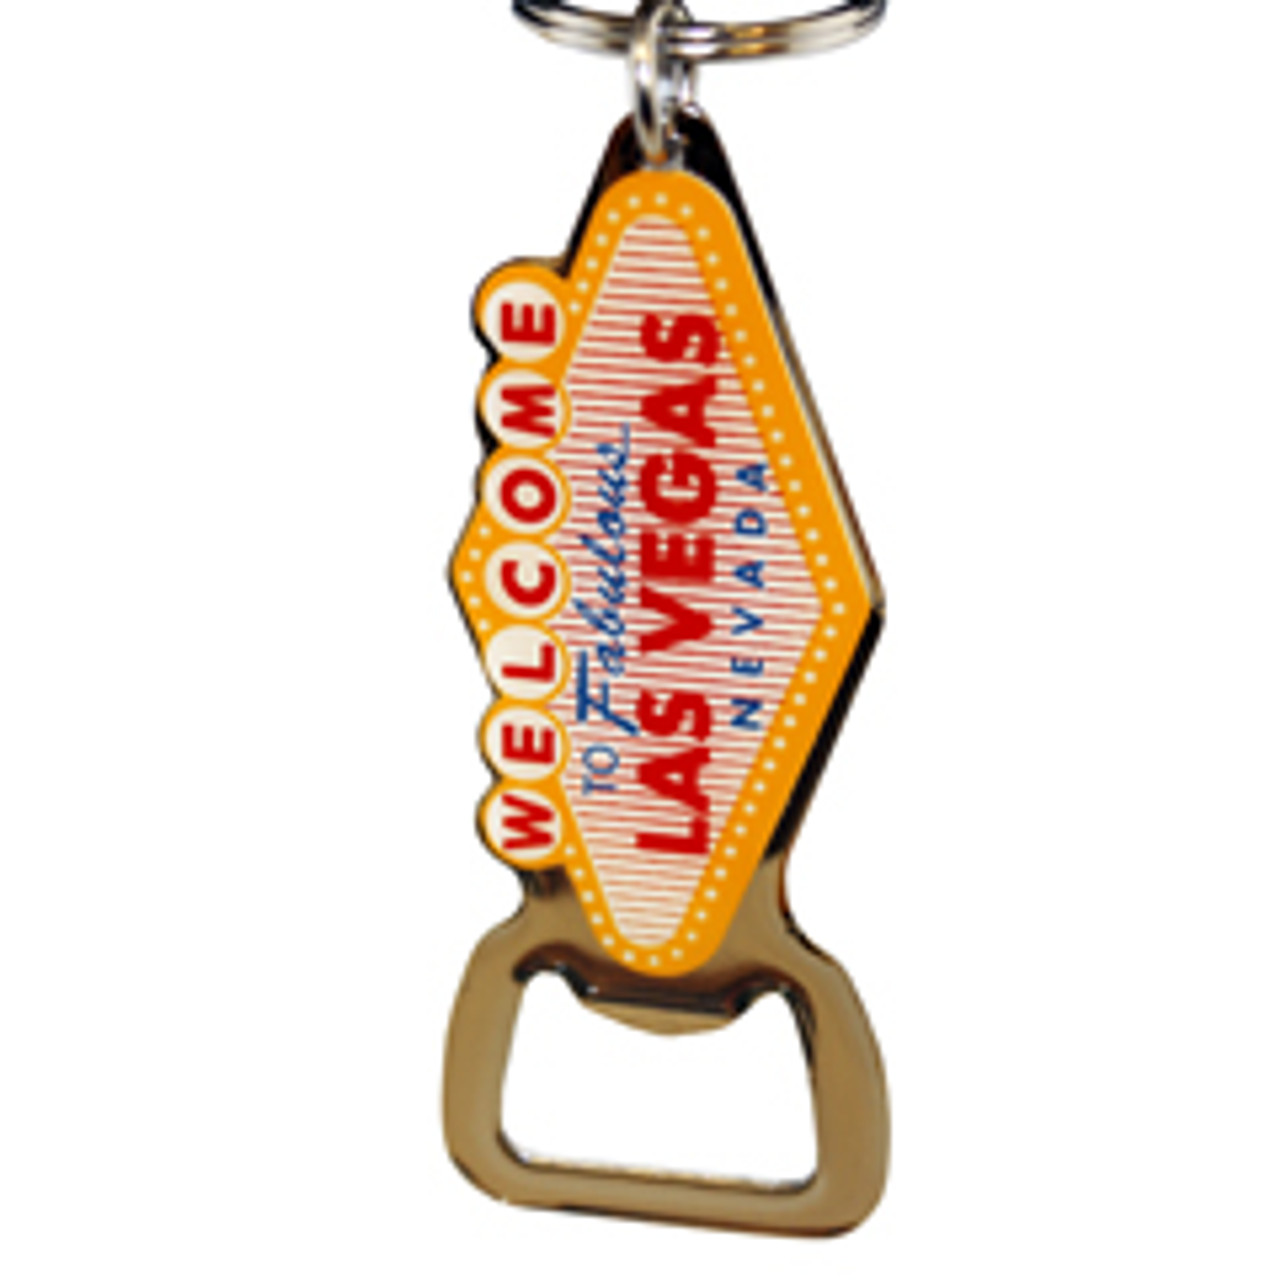 Las Vegas Welcome Sign Keychain